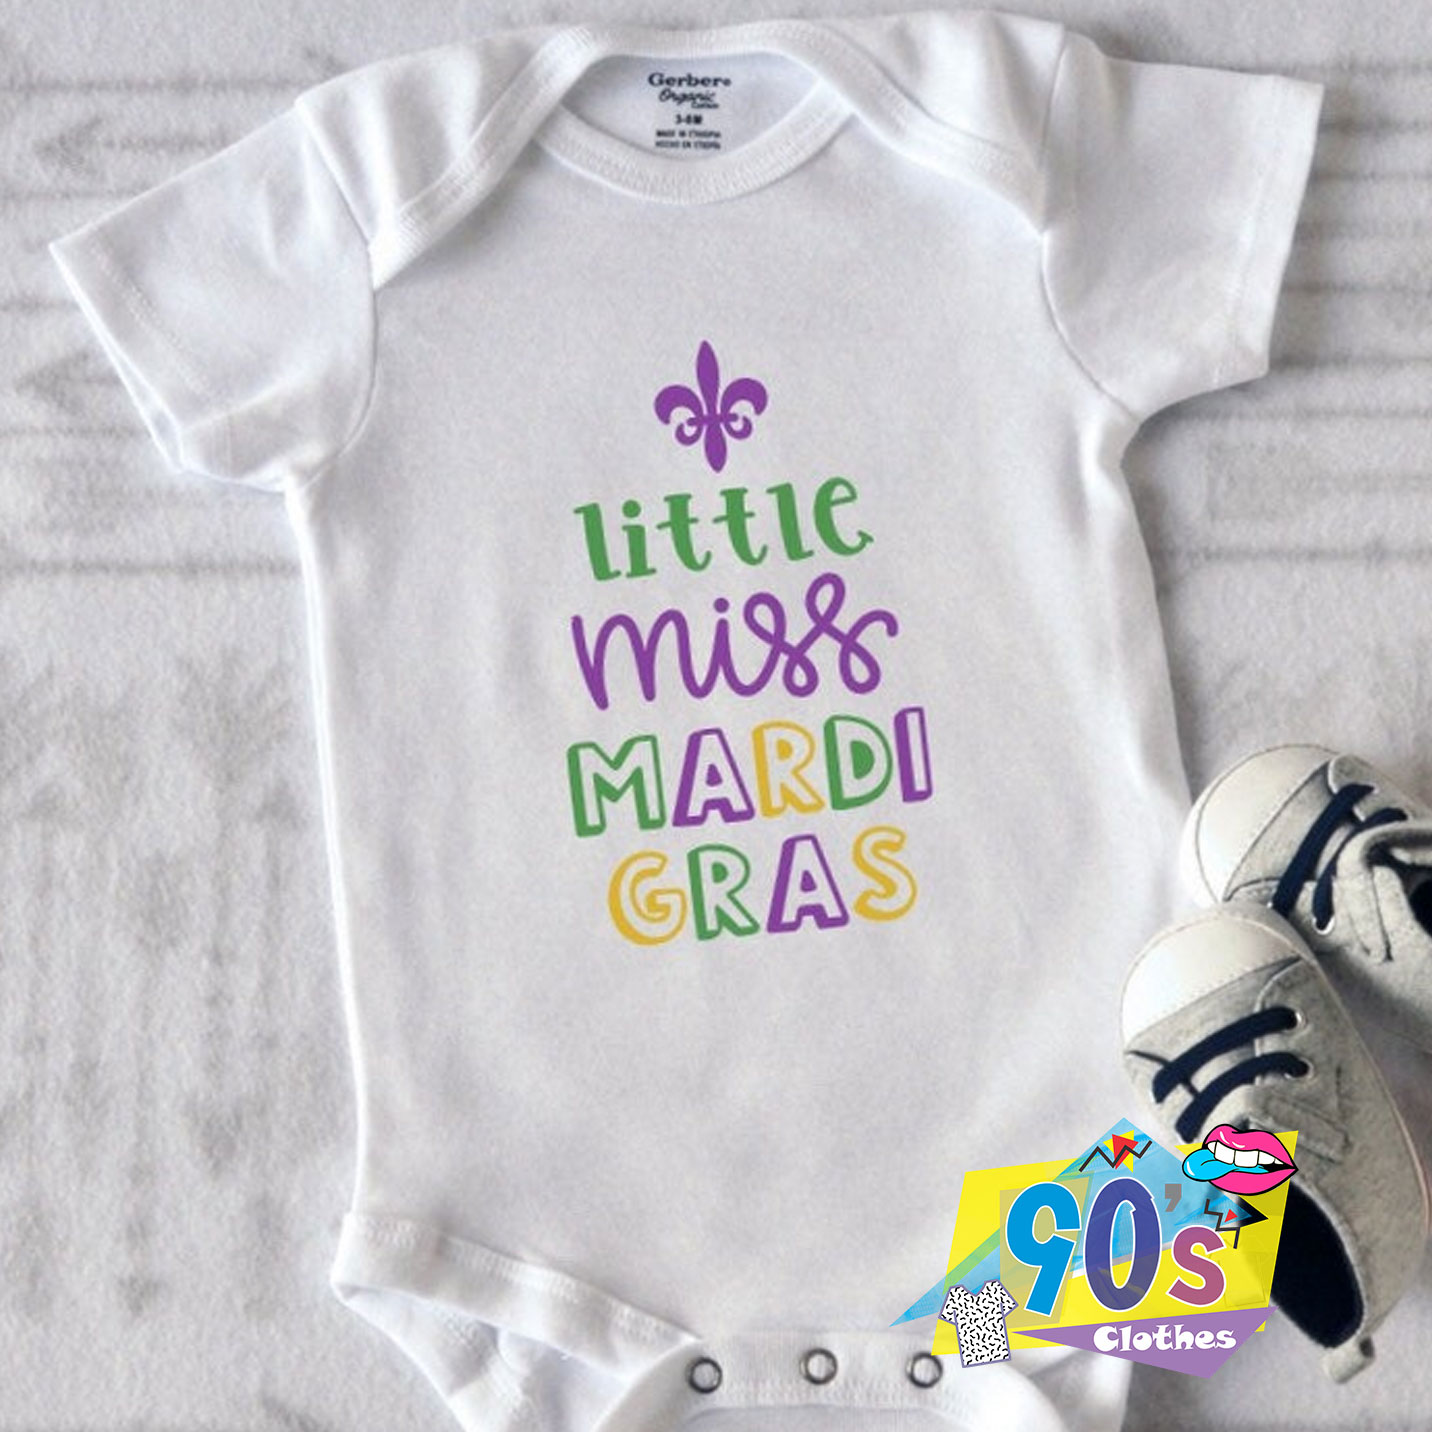 Little Miss Mardi Gras Onesie with matching leg warmers with bows attached Monogrammed Personalized Baby/'s First Mardi Gras Outfit.